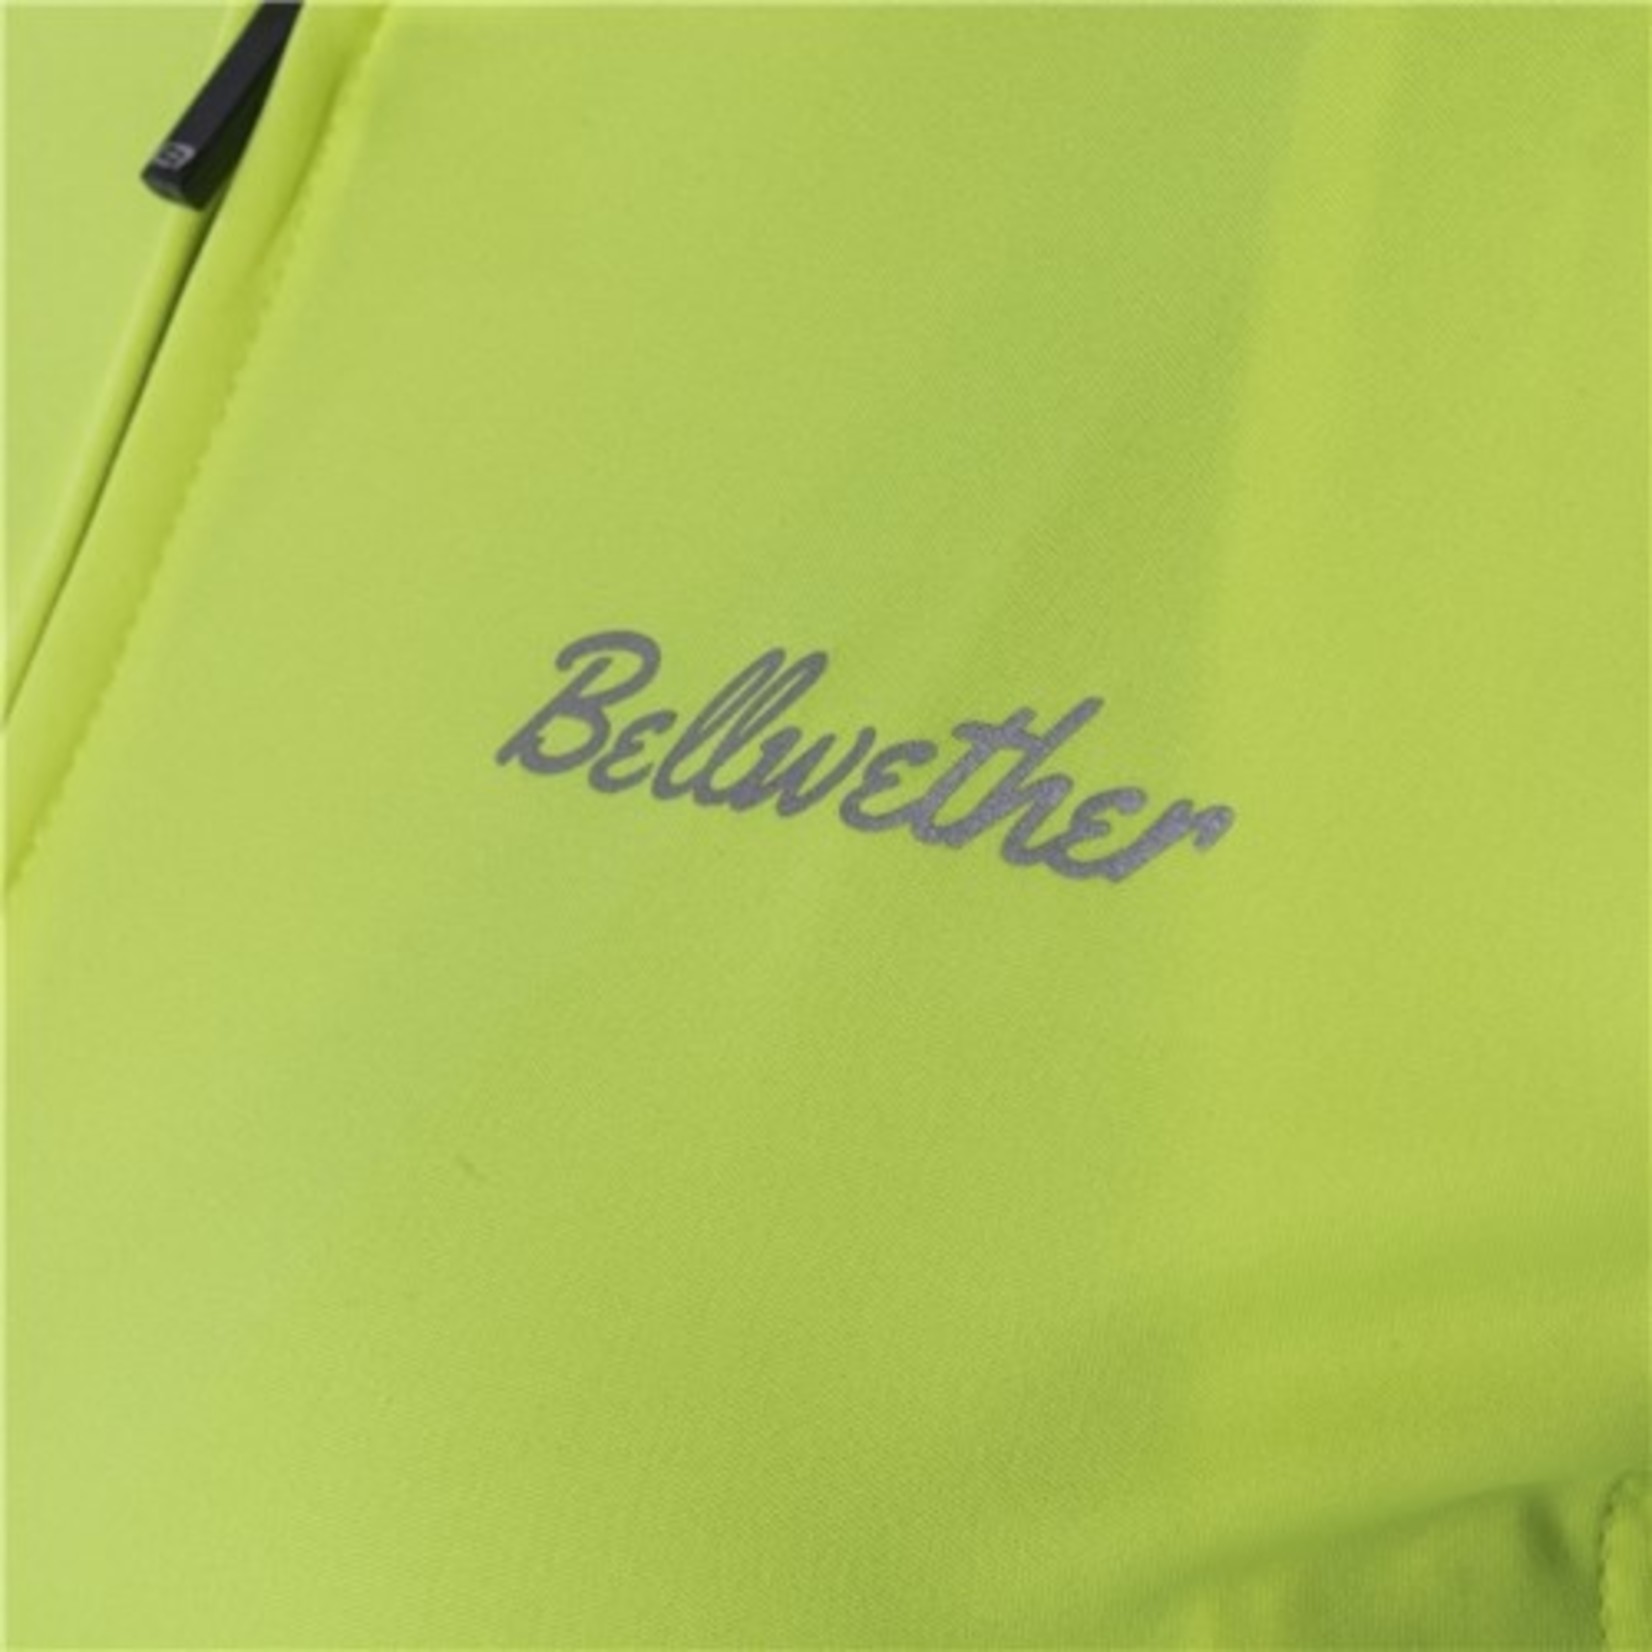 Bellwether Bellwether Criterium Women's Jersey-Hi-Vis Lightweight Highly Breathable Fabrics